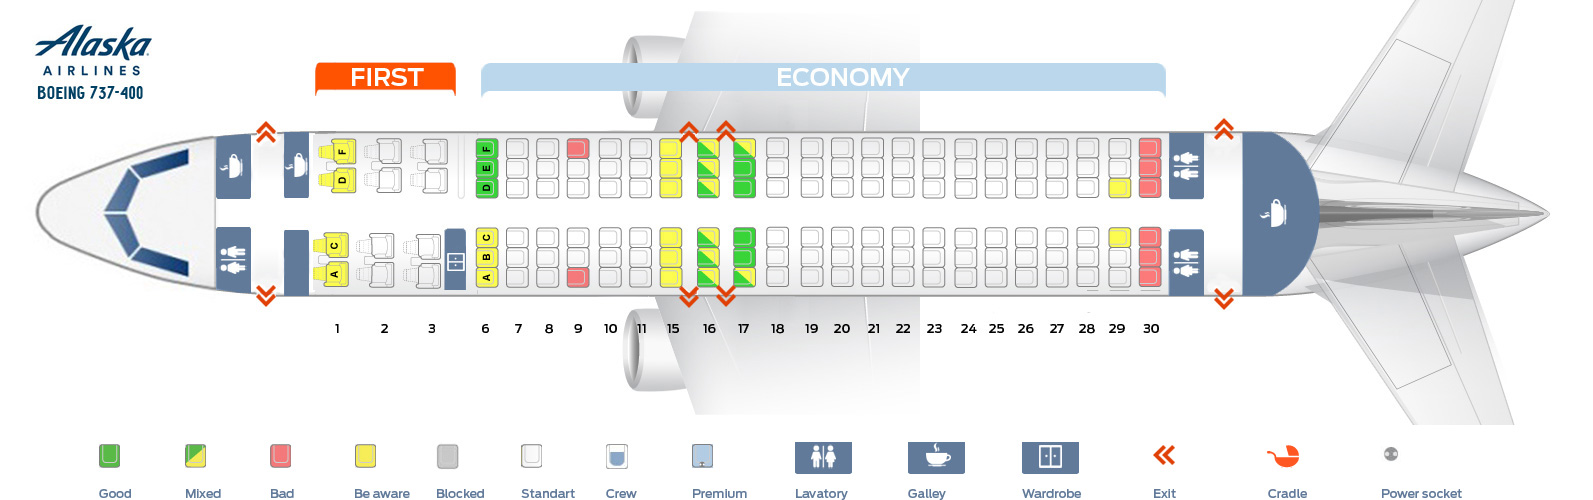 Alaska Airlines Seating Chart 737 400